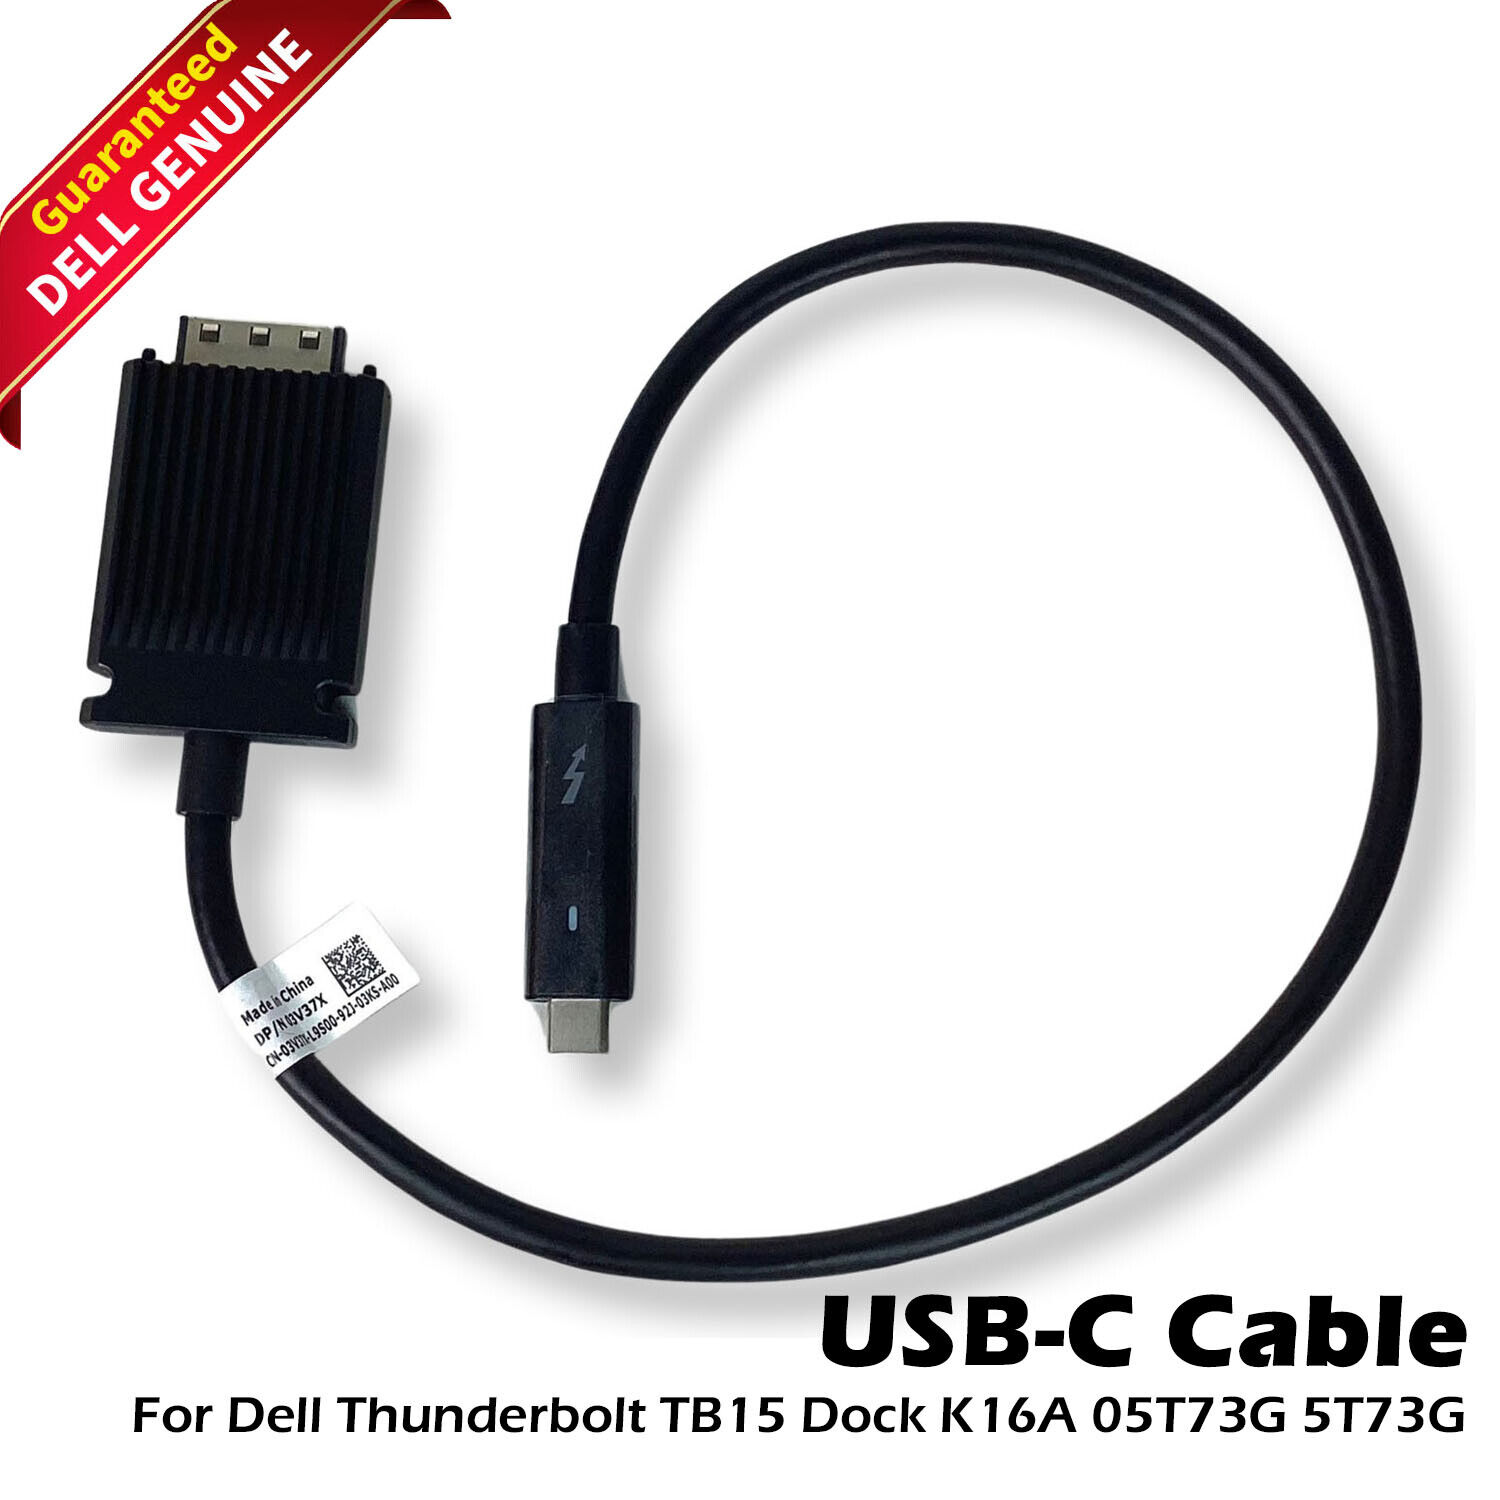 Genuine Dell Thunderbolt 3 USB-C Cable for TB15 TB16 Dock K16A K17A 3V37X 5T73G